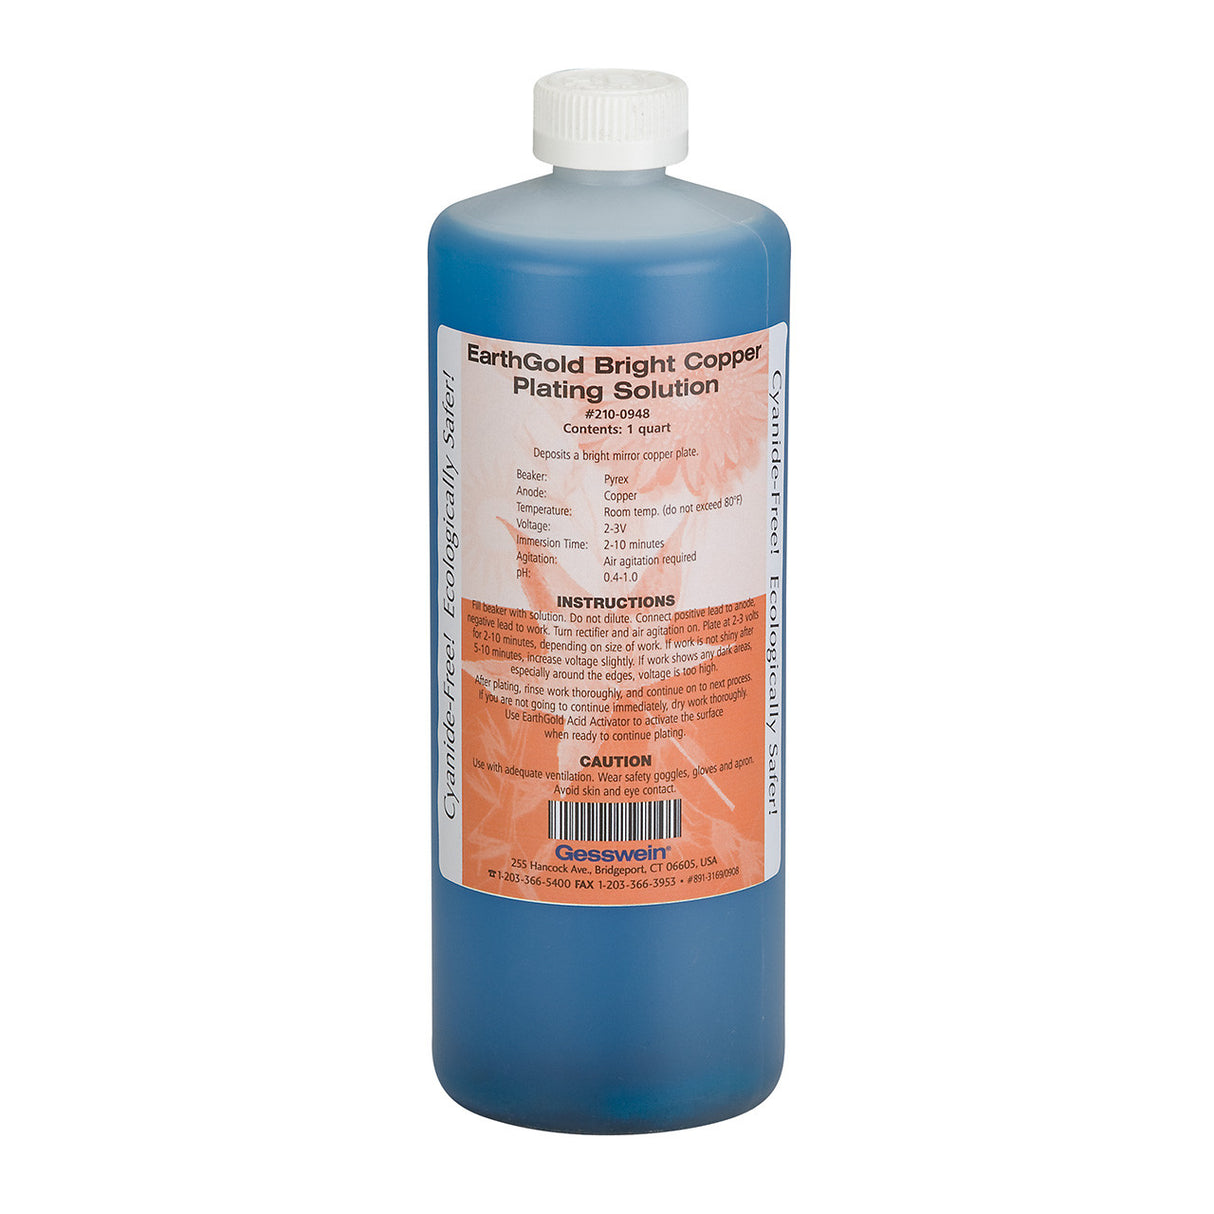 PM1034 = Earthcoat 24K Gold Cyanide Free Plating Solution 1qt by FDJtool -  FDJ Tool